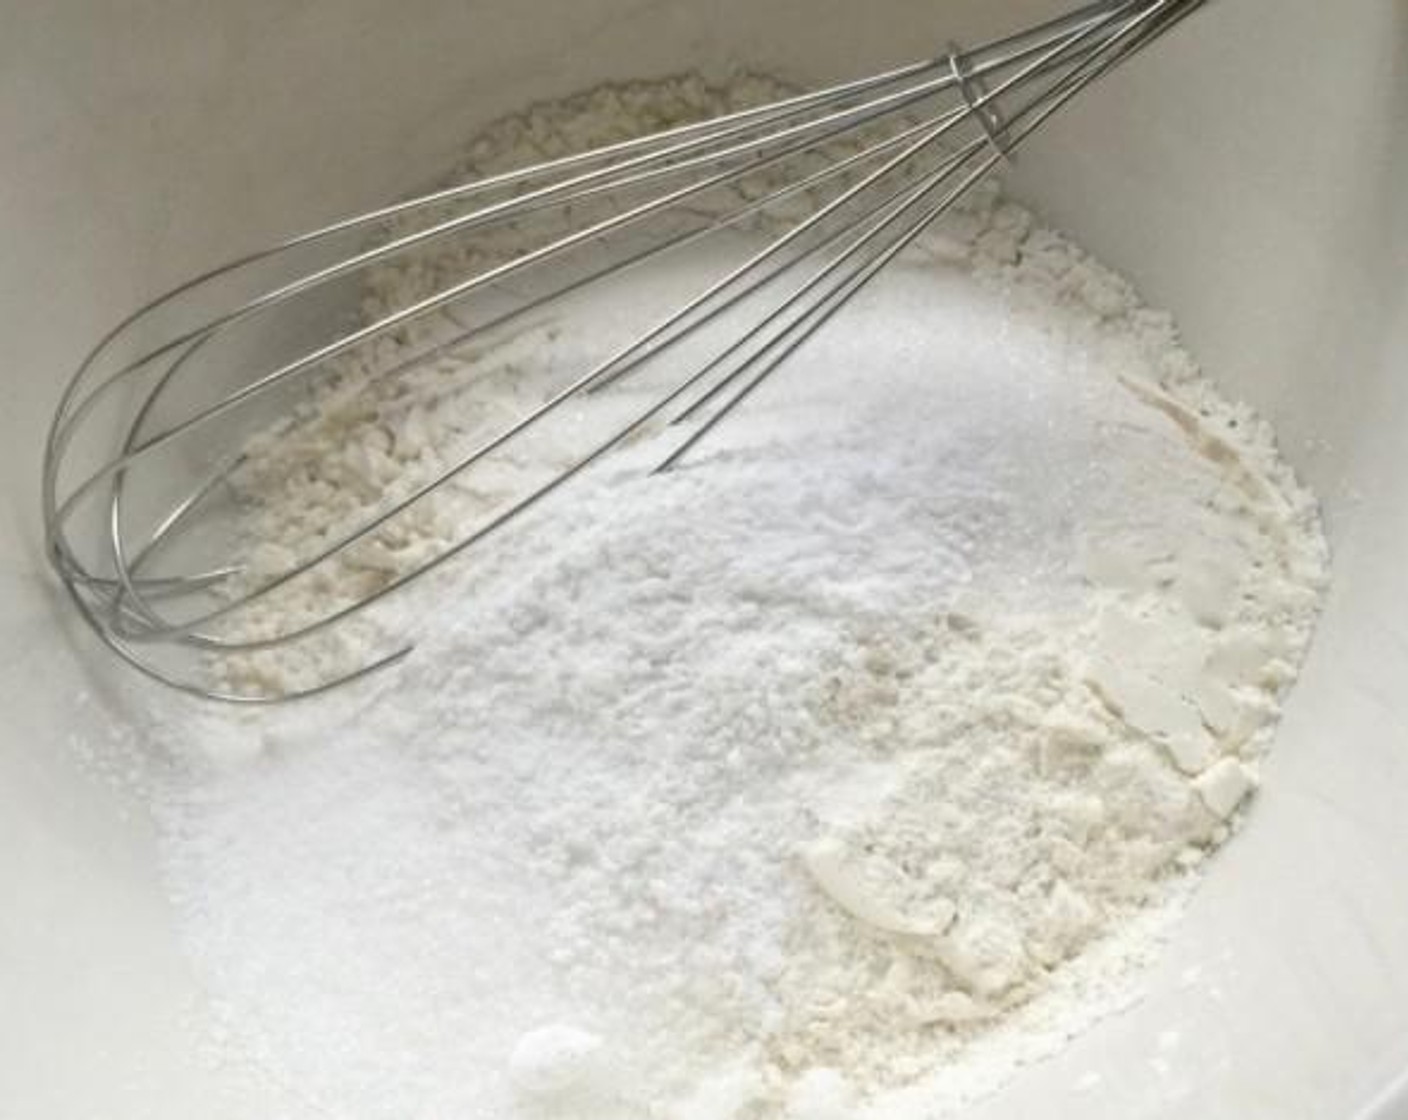 step 3 In a large bowl, whisk together All-Purpose Flour (2 cups), Granulated Sugar (1/4 cup), Baking Powder (1 1/4 tsp), Baking Soda (1/4 tsp), and Salt (1/4 tsp).